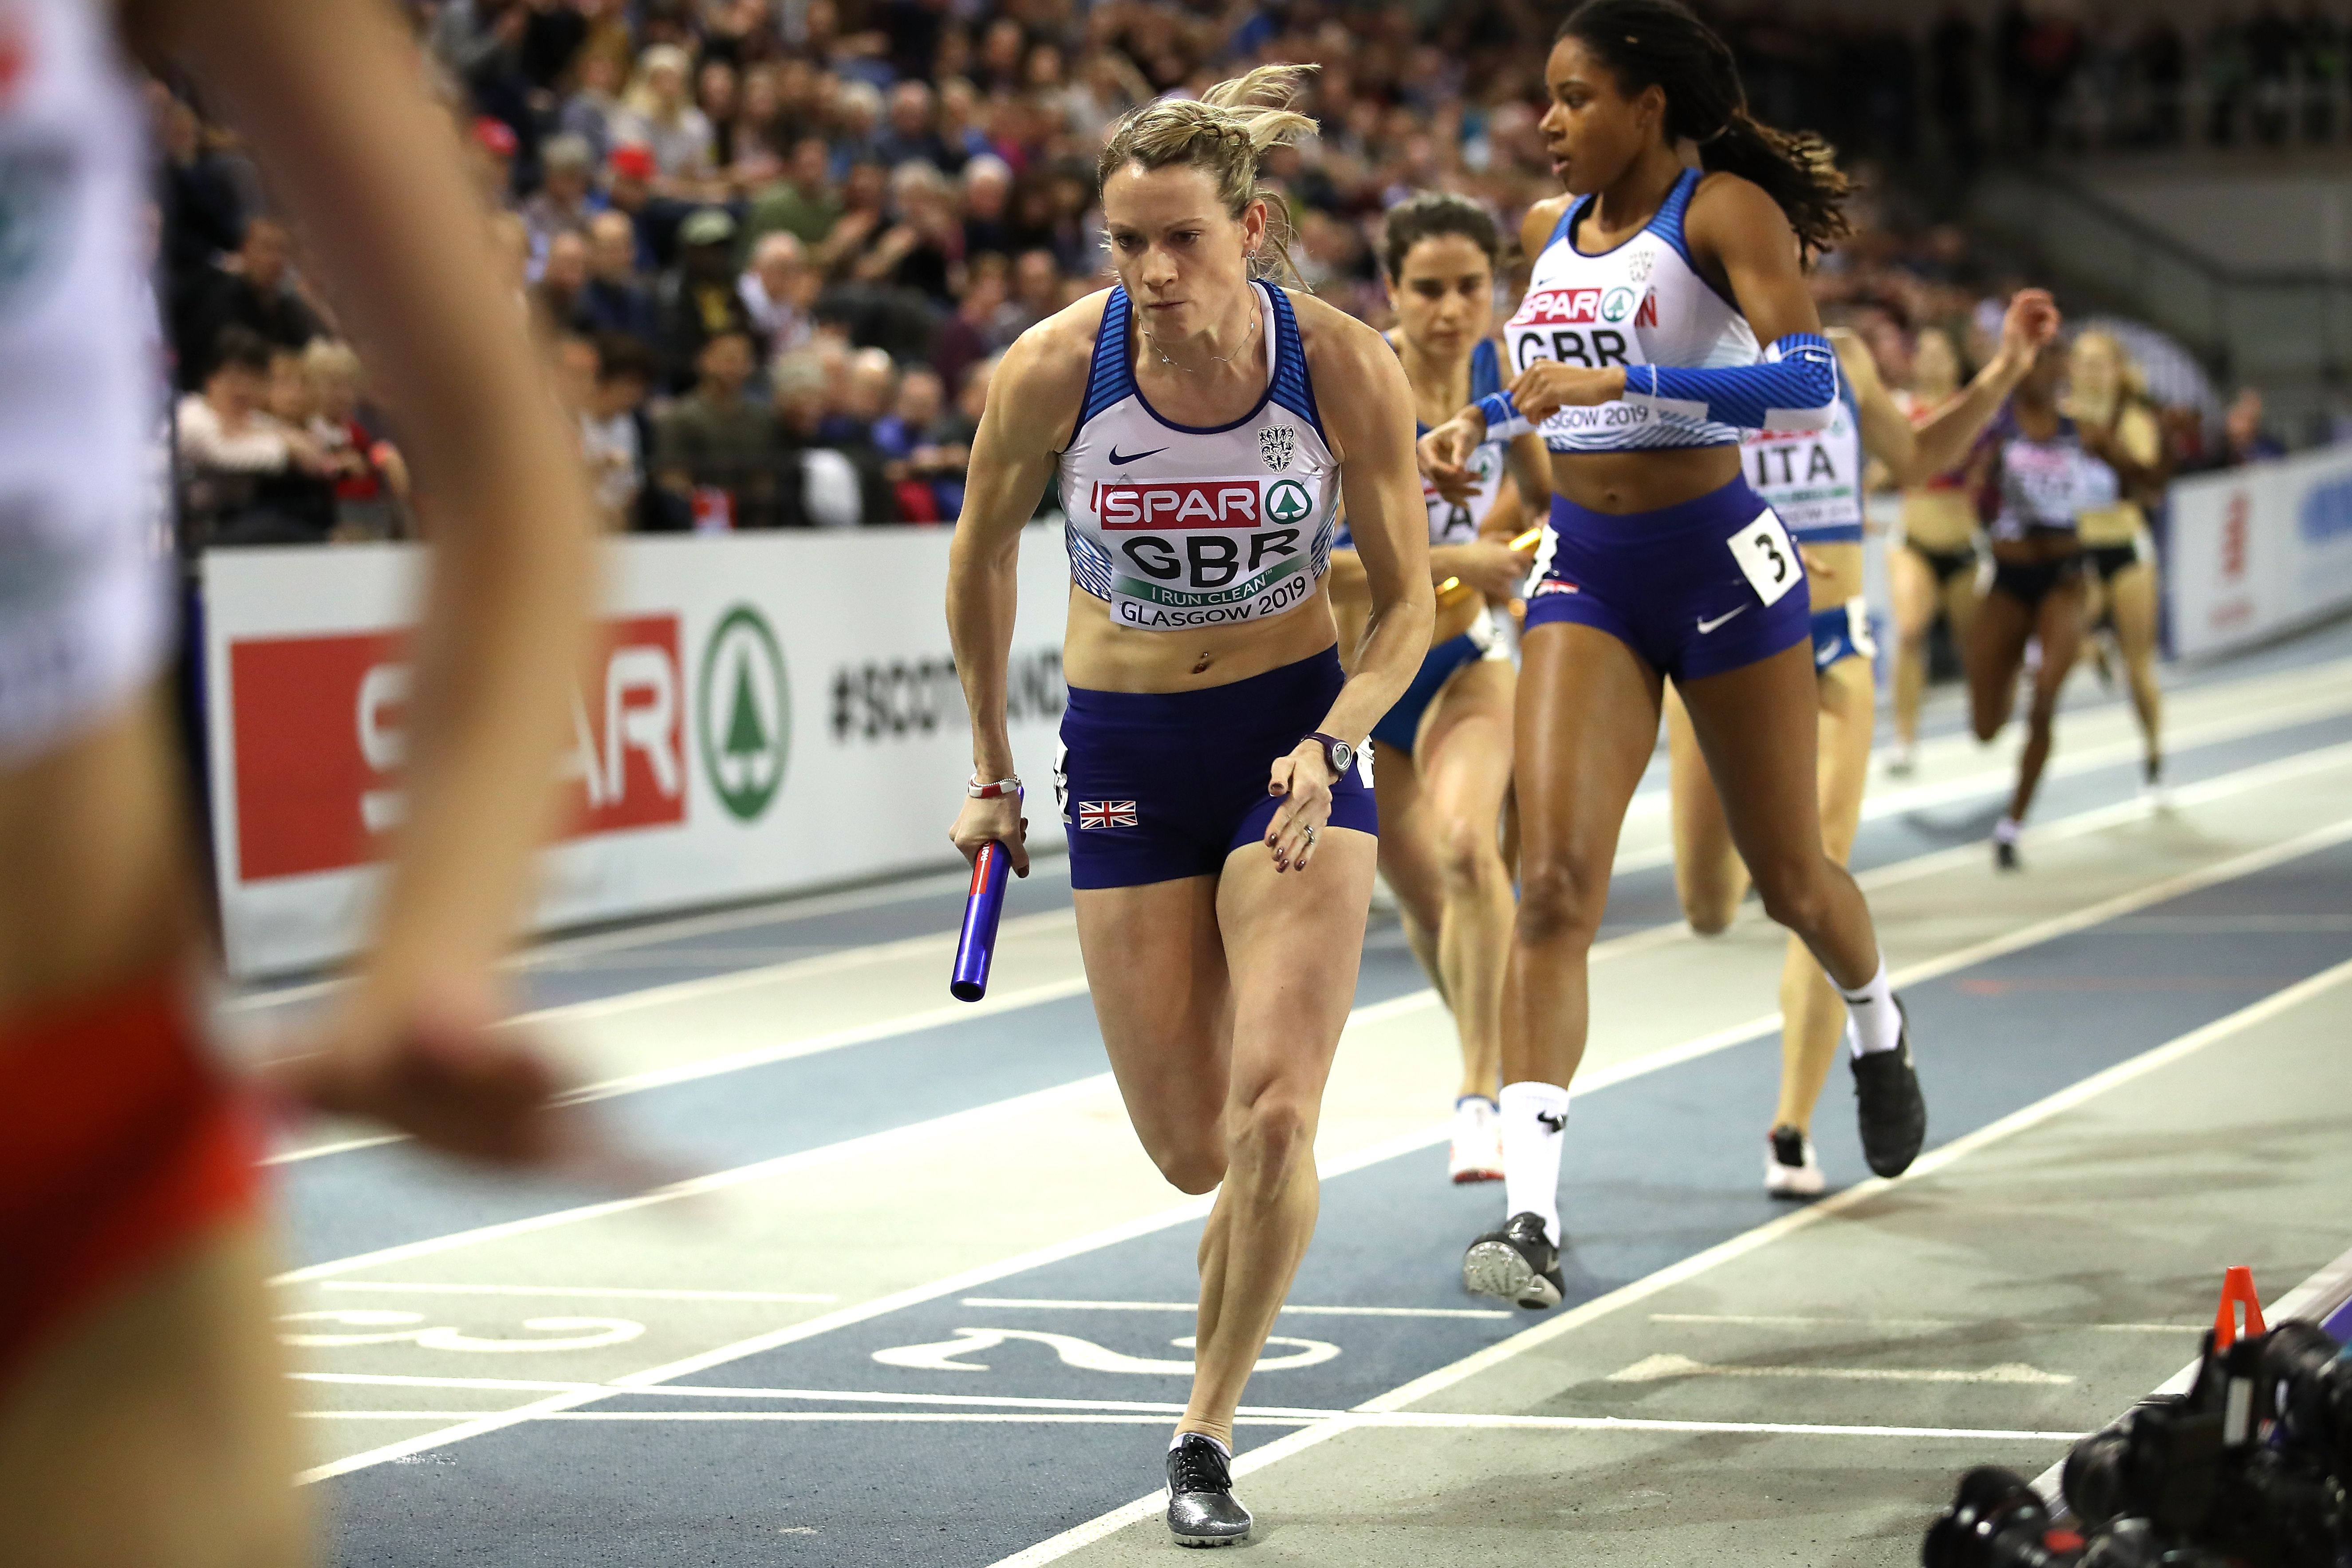 Eilidh Doyle in the 4x400m at the 2019 European Indoor Championships